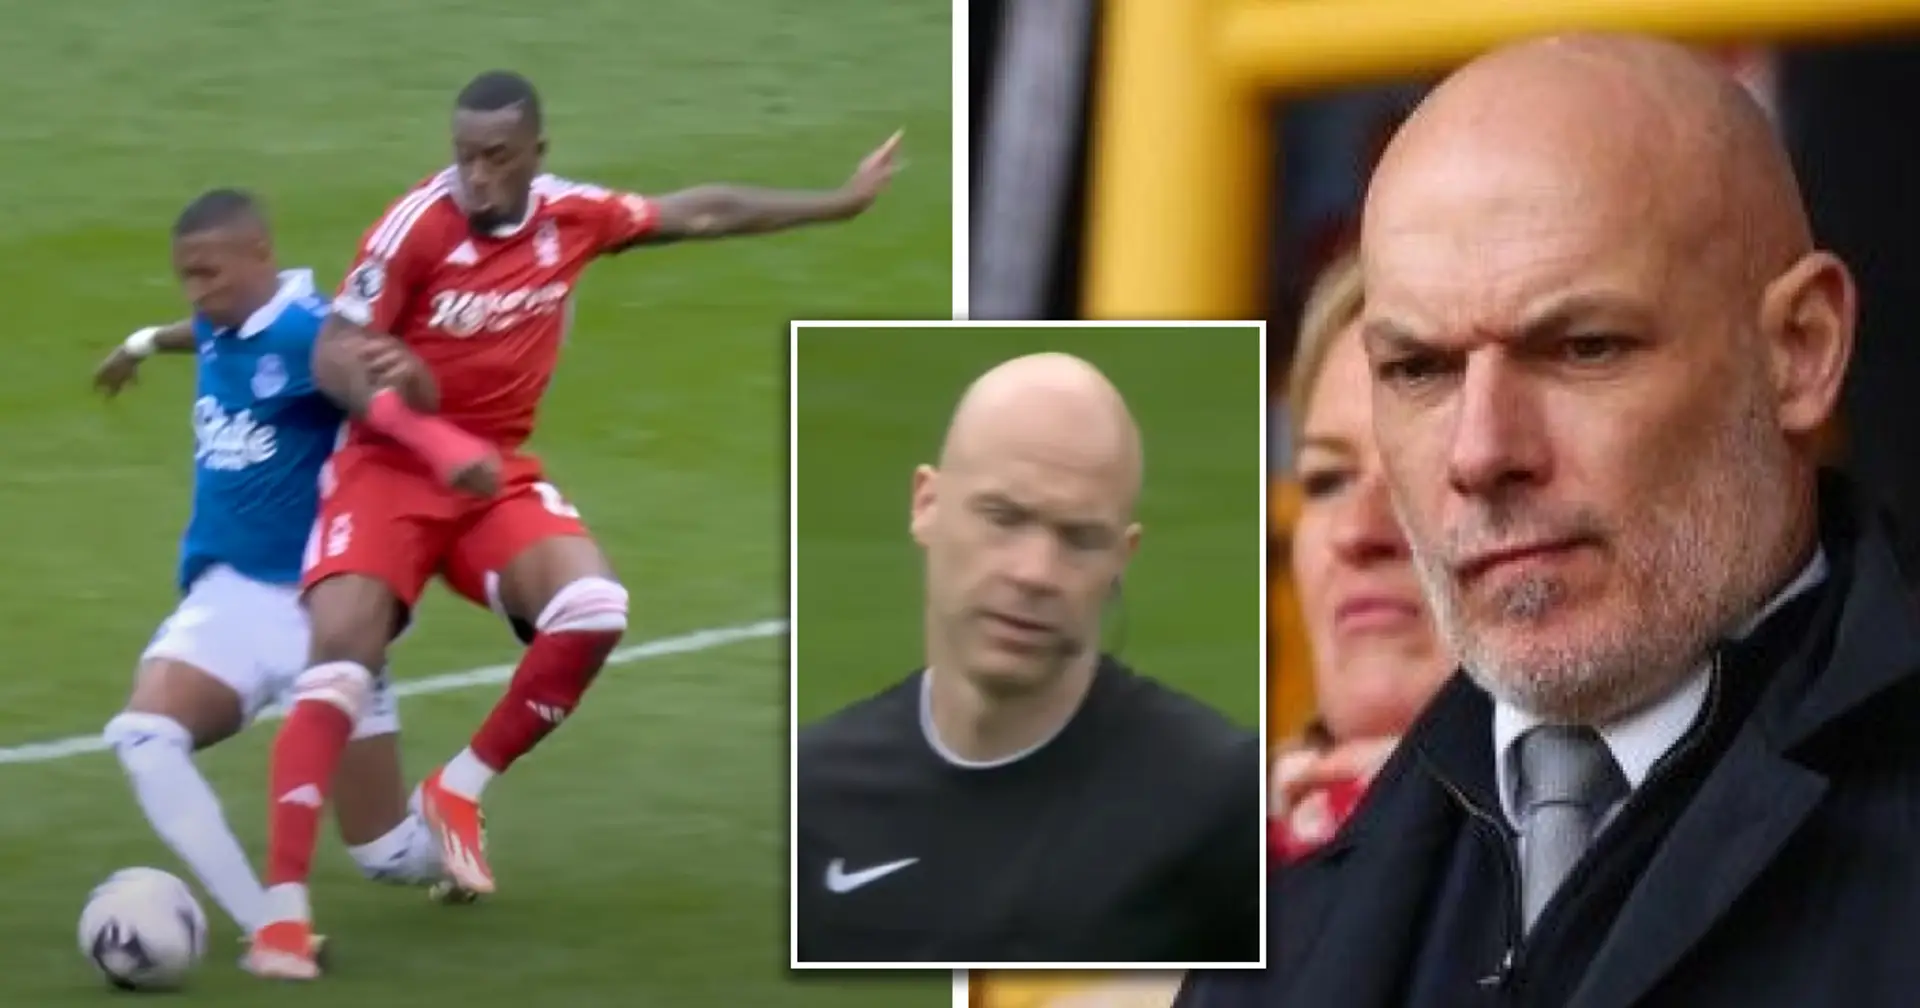 Howard Webb admits VAR error on Forest penalty as audio recordings between officials released